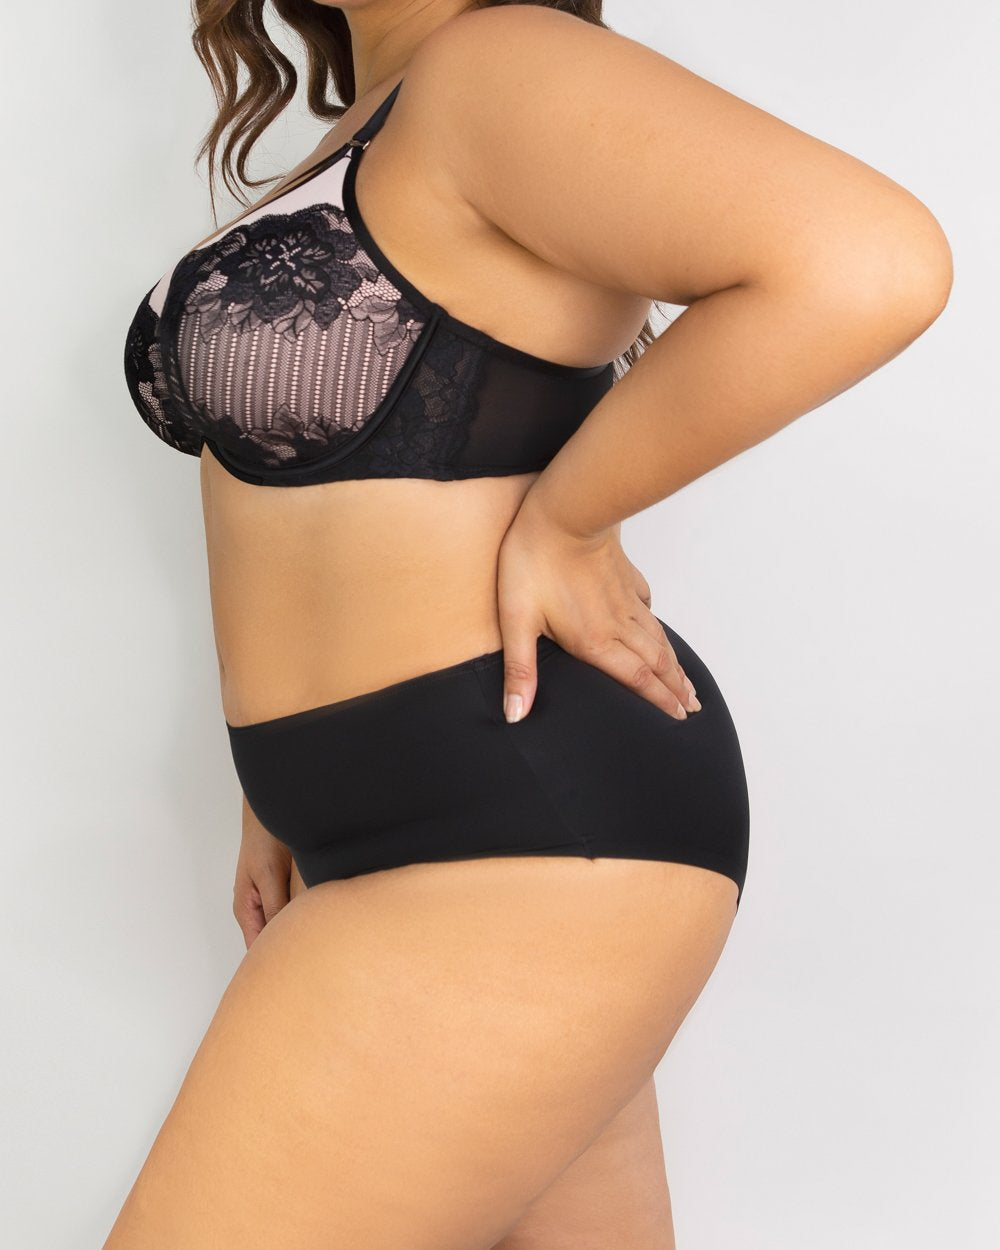 Thick and juicy❤  Fit black women, Boy shorts panties, Curvy woman